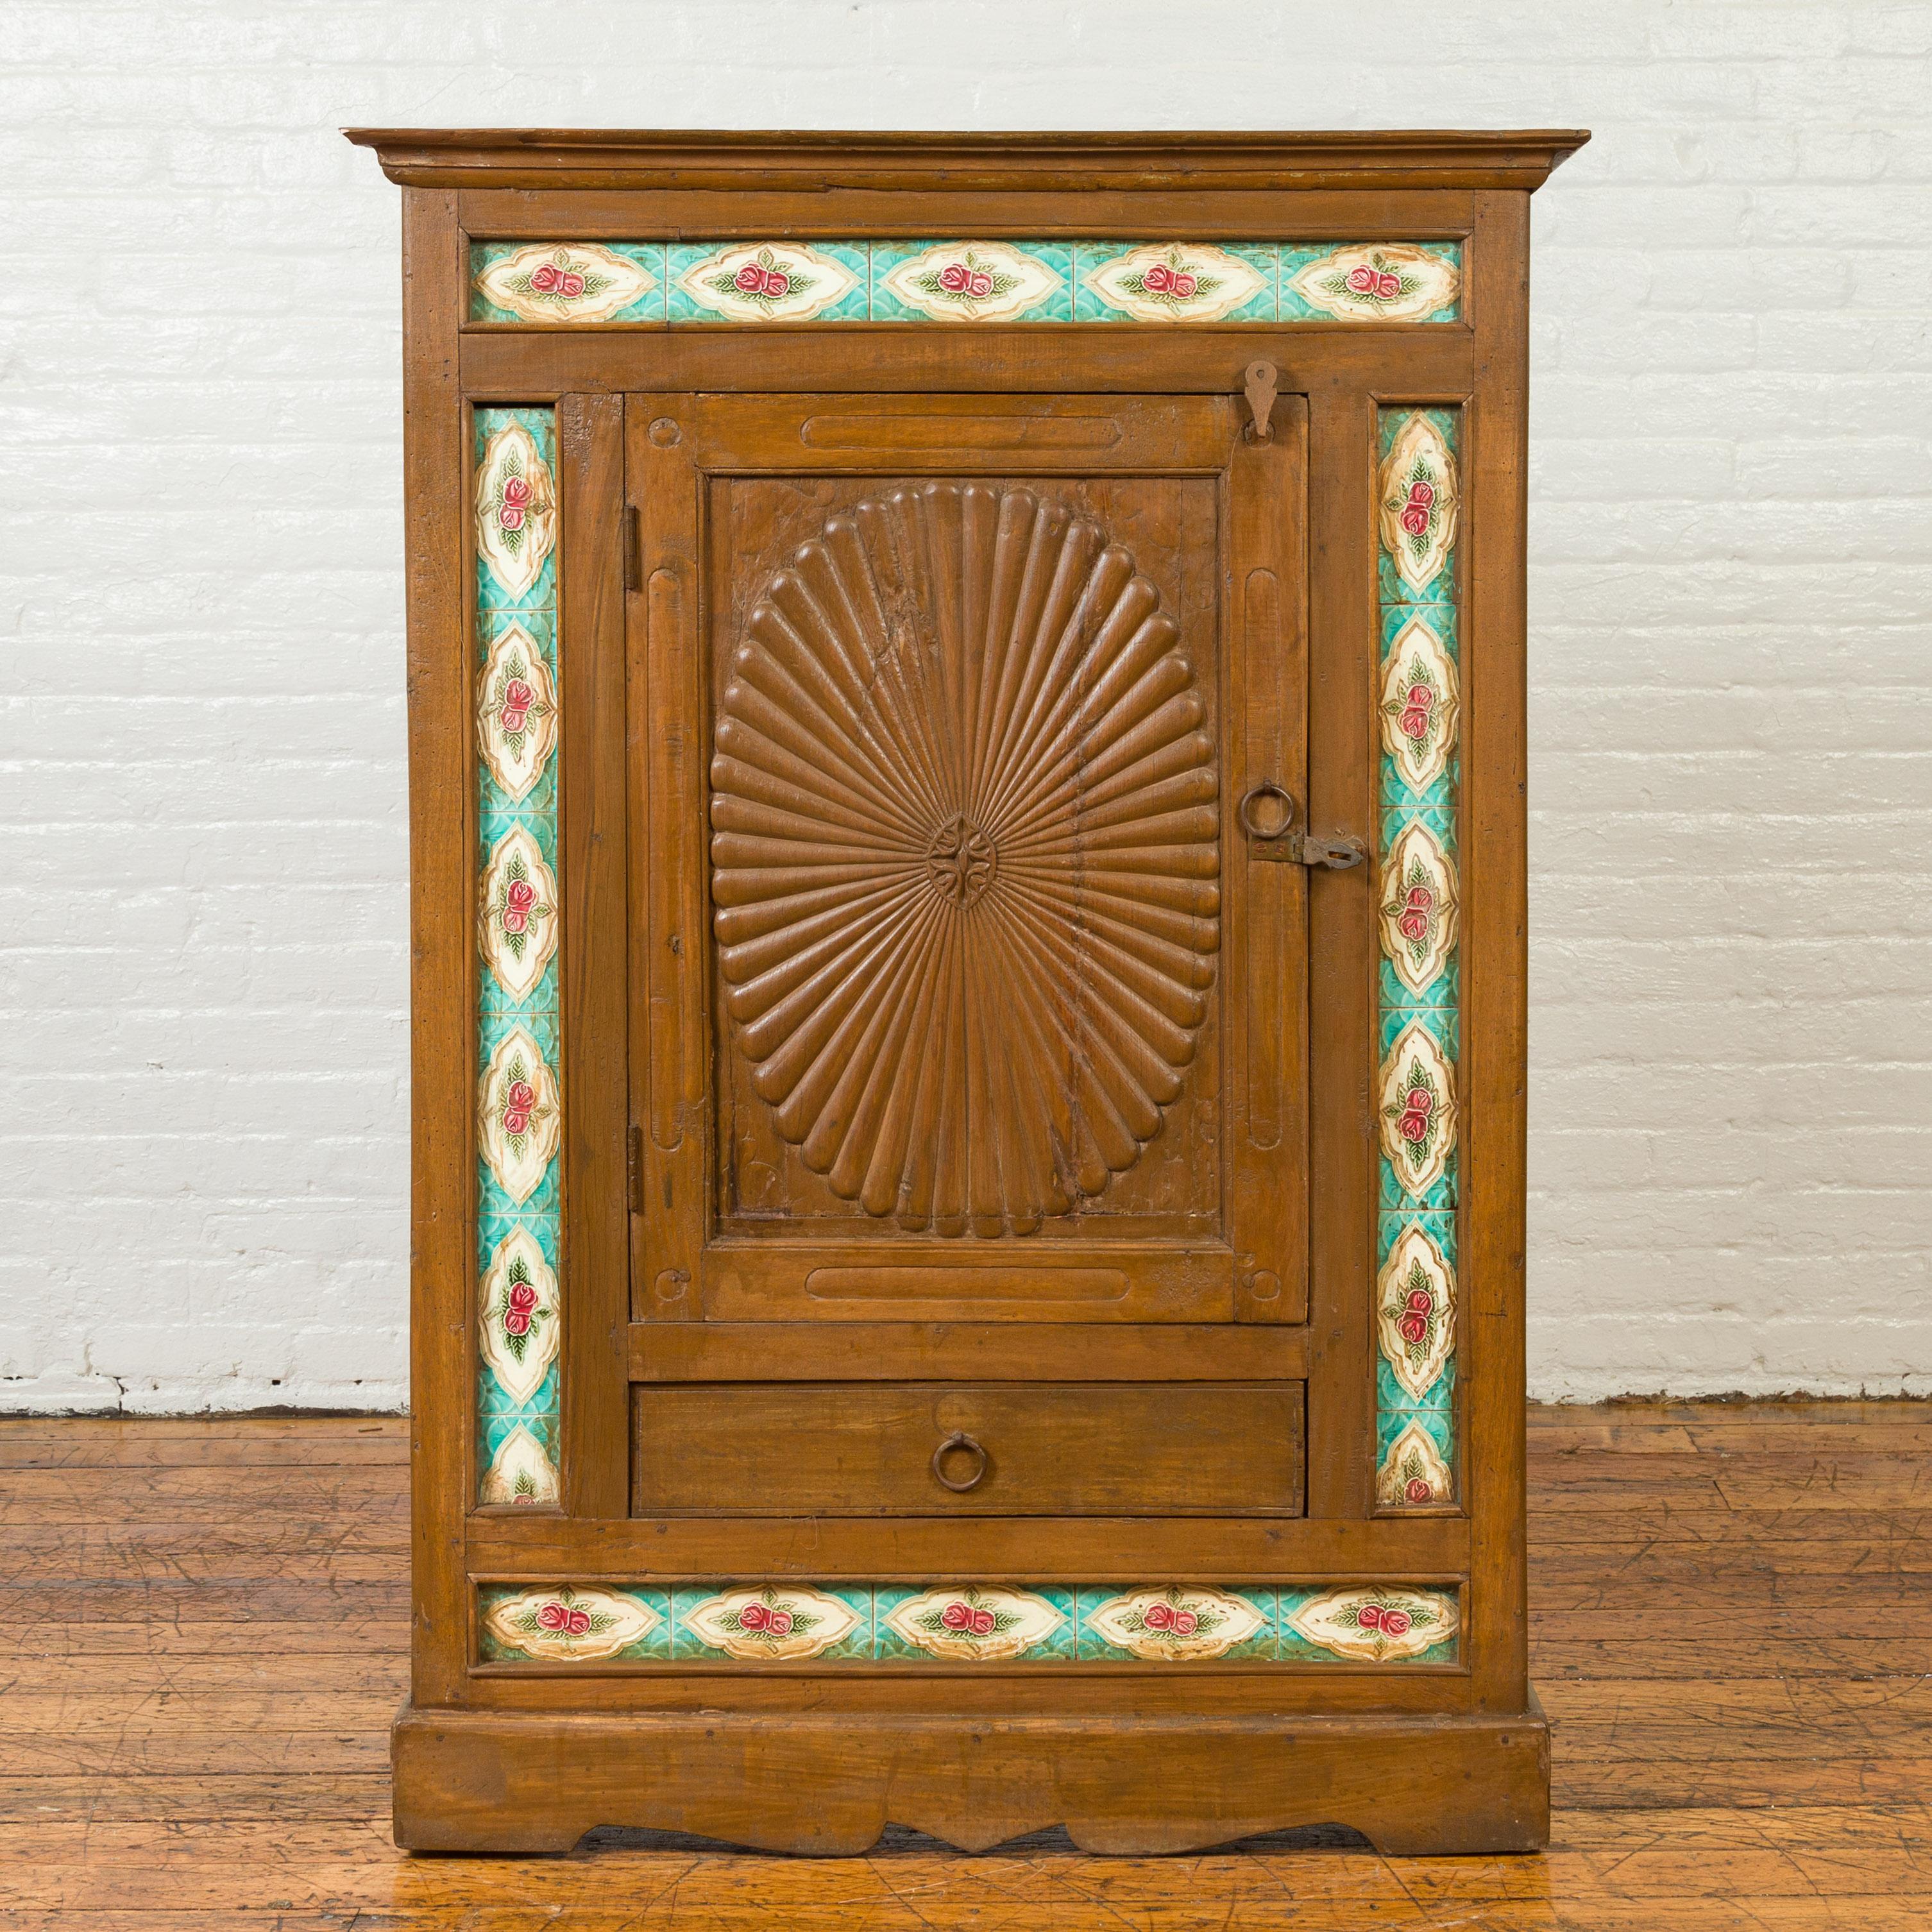 An antique Indian small cabinet from the early 20th century with carved sunburst pattern and hand painted tiles. Born in India, this wooden cabinet features a small cornice overhanging a perfectly organized façade. A central door, carved with oval